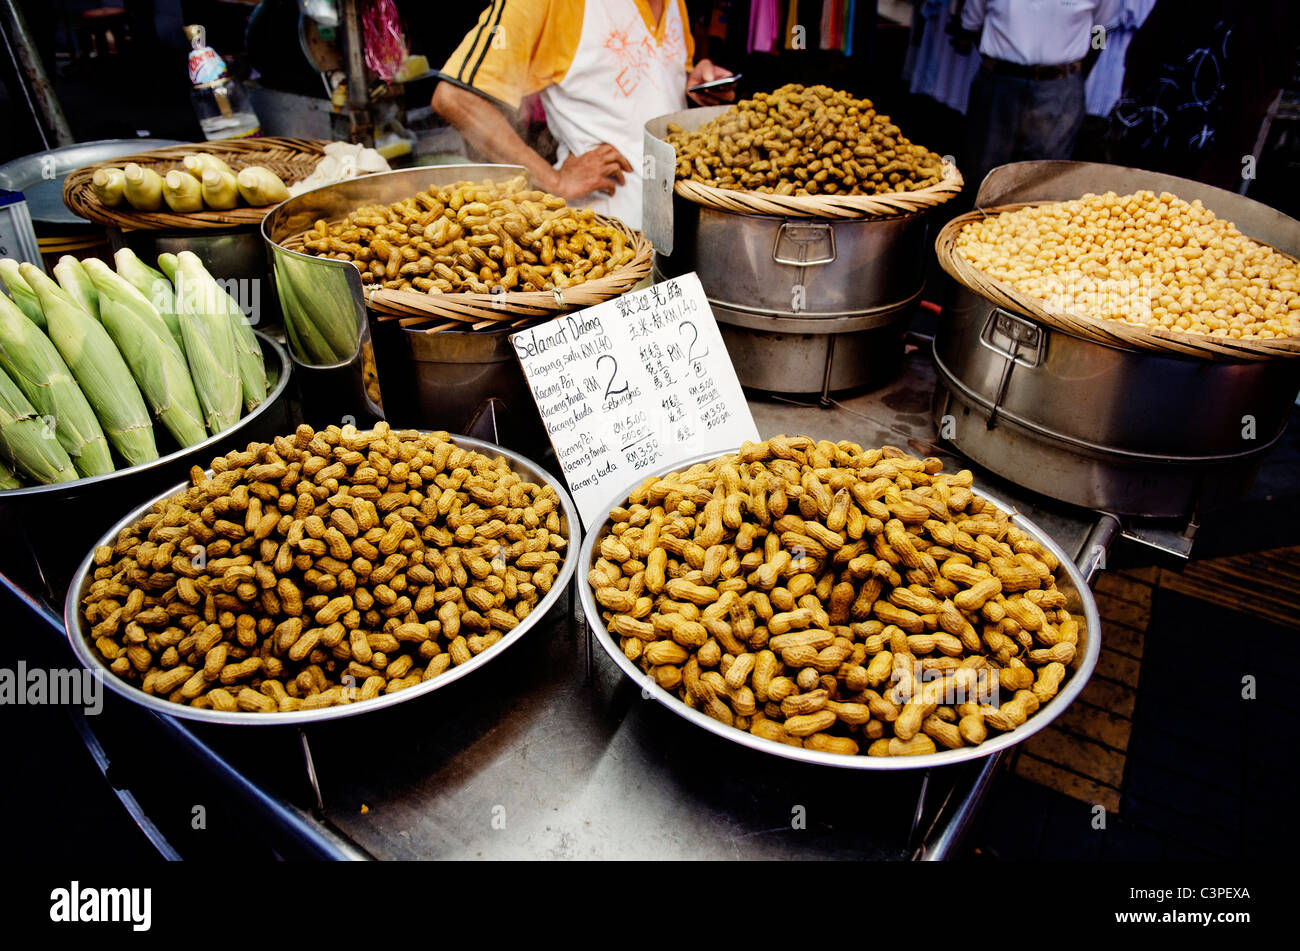 peanuts and other snacks in street market penang malaysia Stock Photo